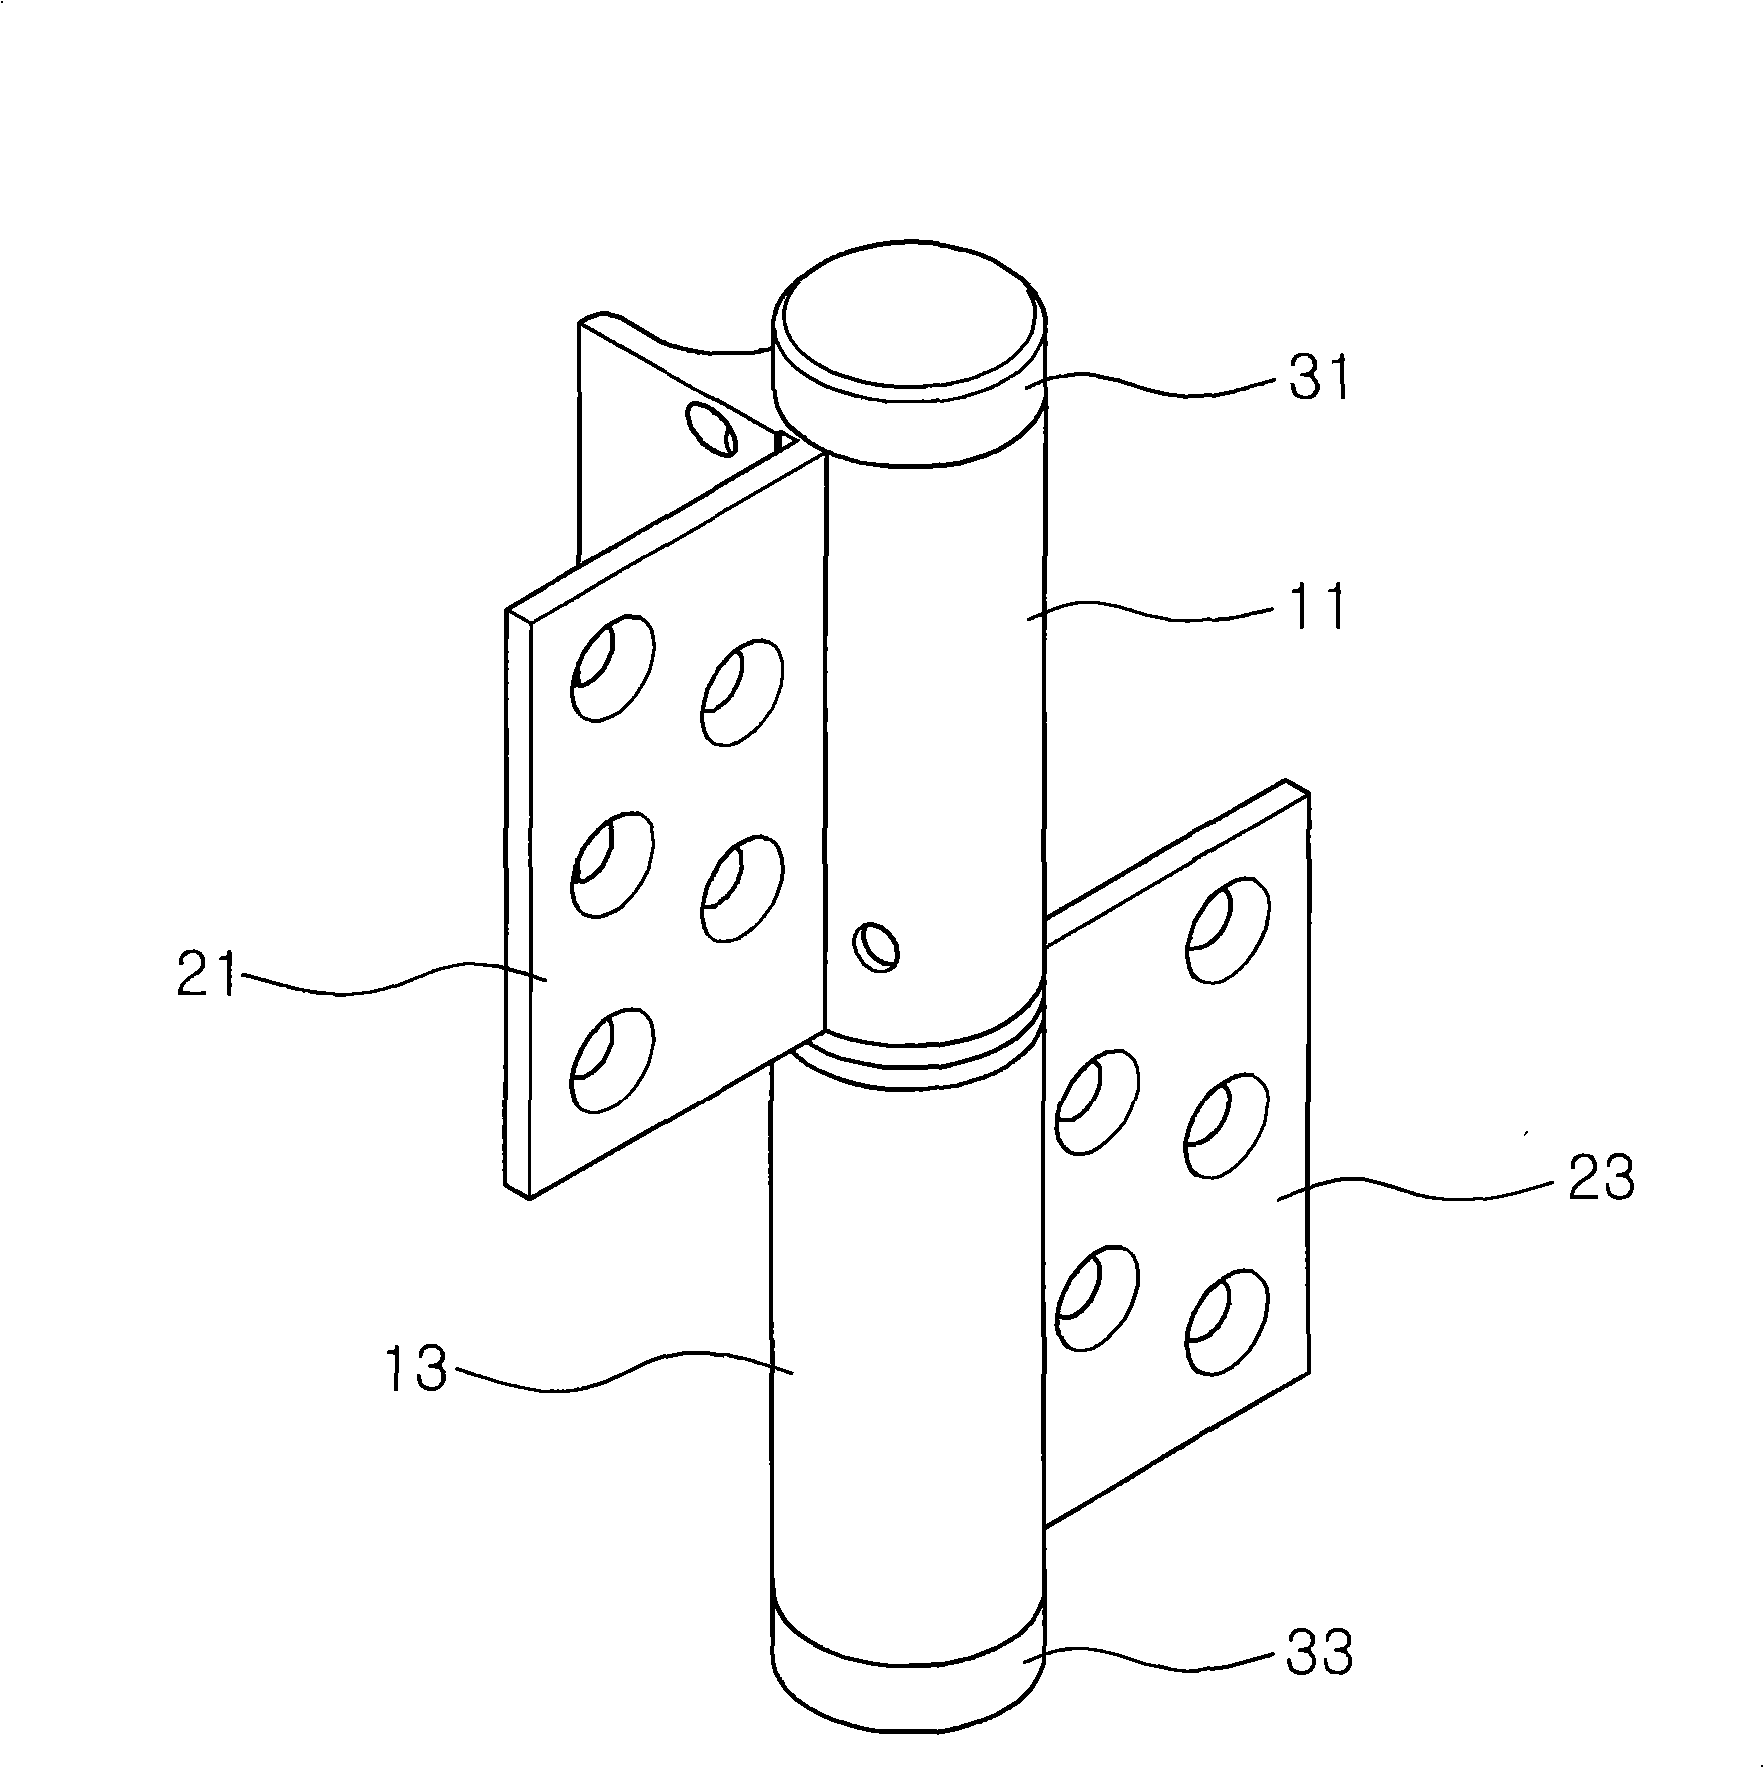 Hinge apparatus having automatic return function for use in building materials